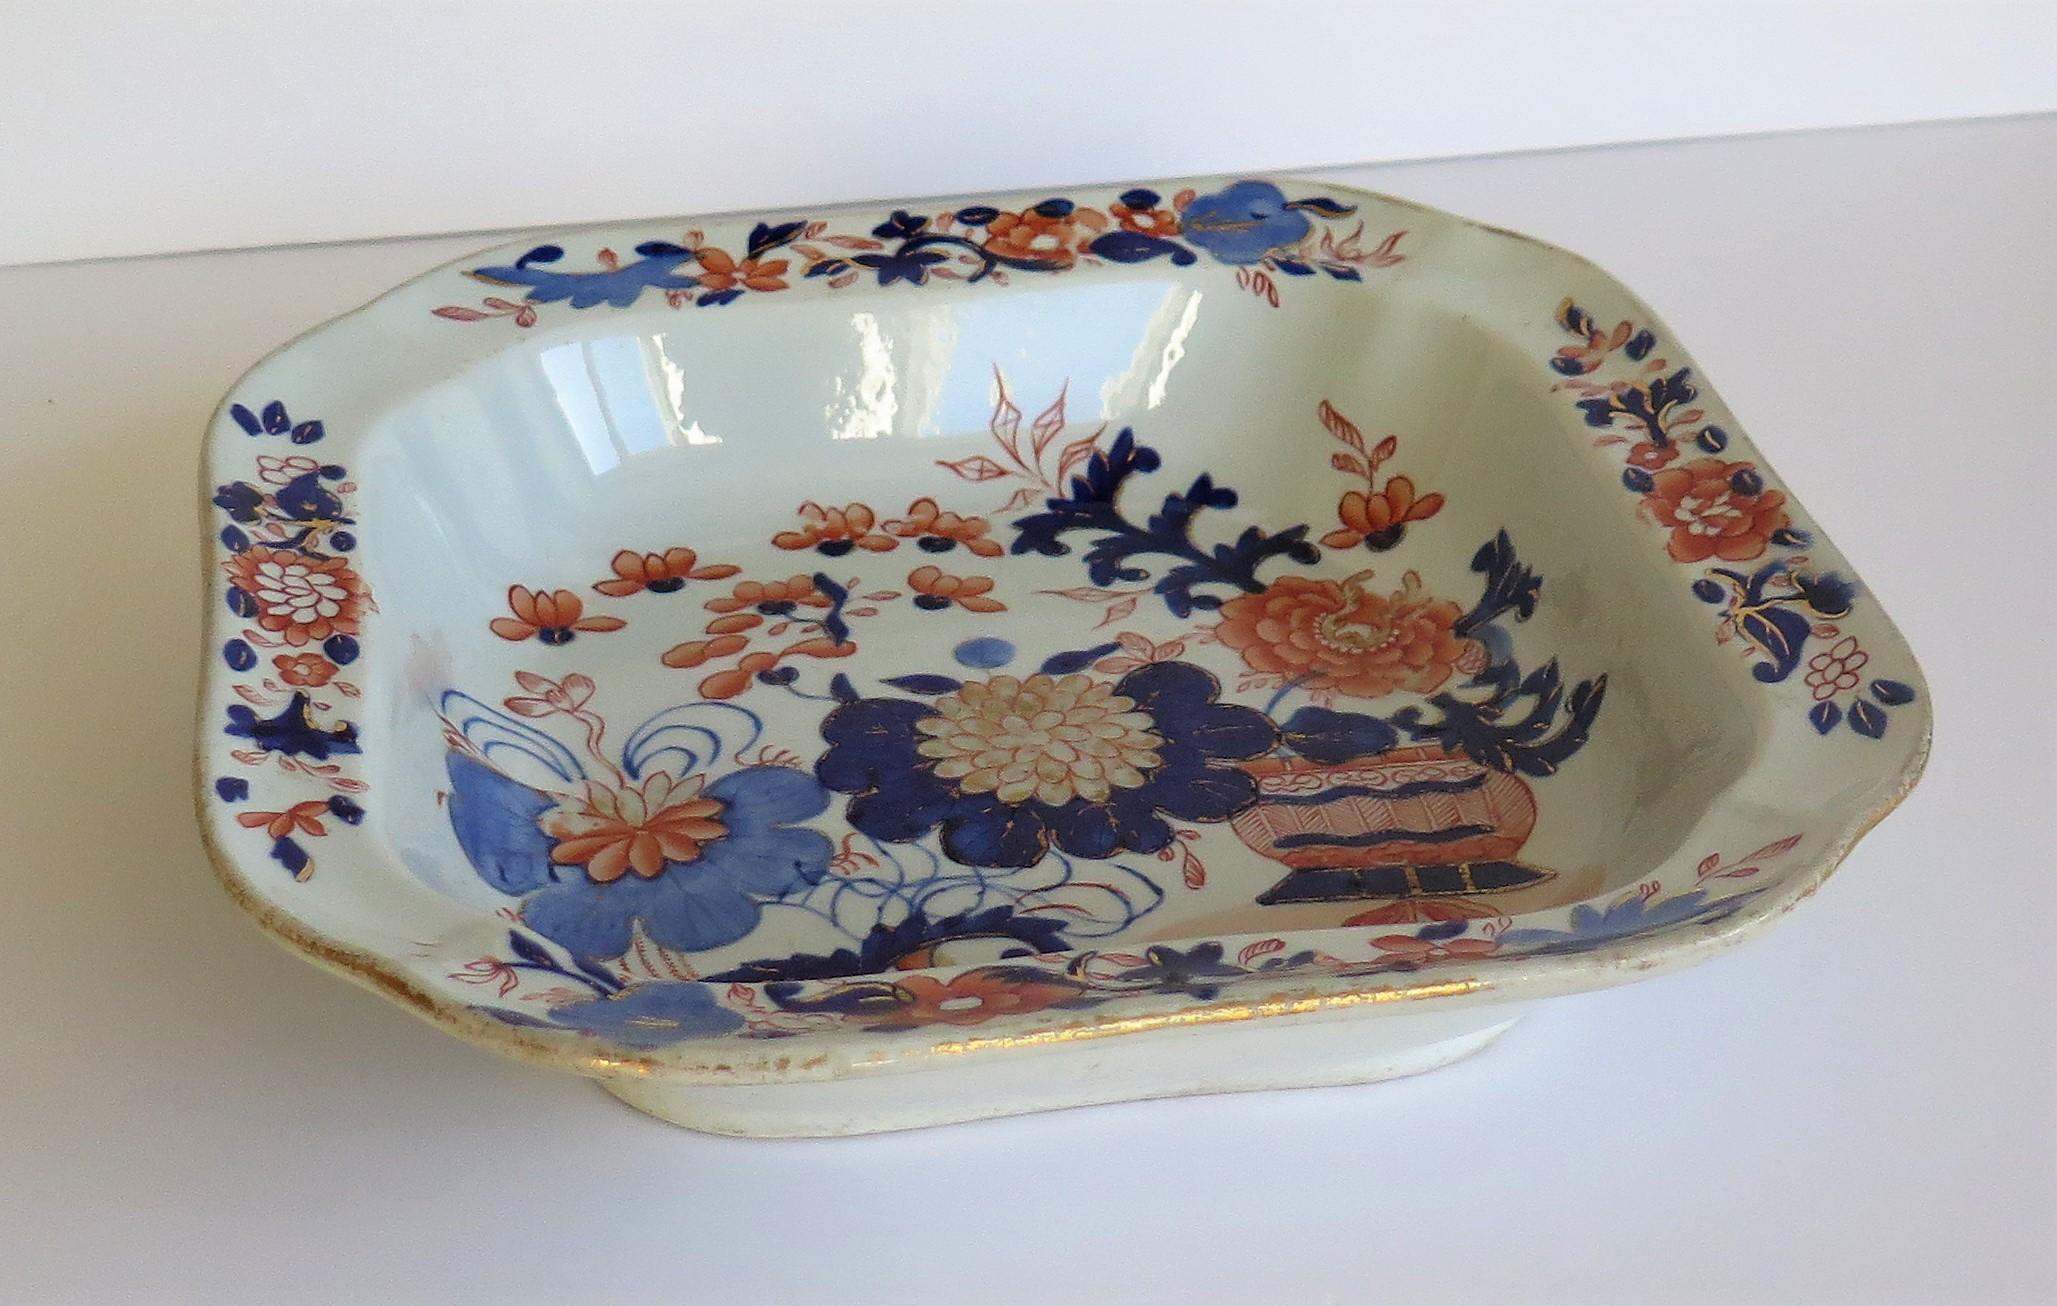 This is a very good large bowl or serving dish in the gilded Japan basket pattern, made by Mason's Ironstone, England in the early 19th century, circa 1815-1820.

Early Mason's bowls of this size and shape tend to be harder to find.

The bowl is